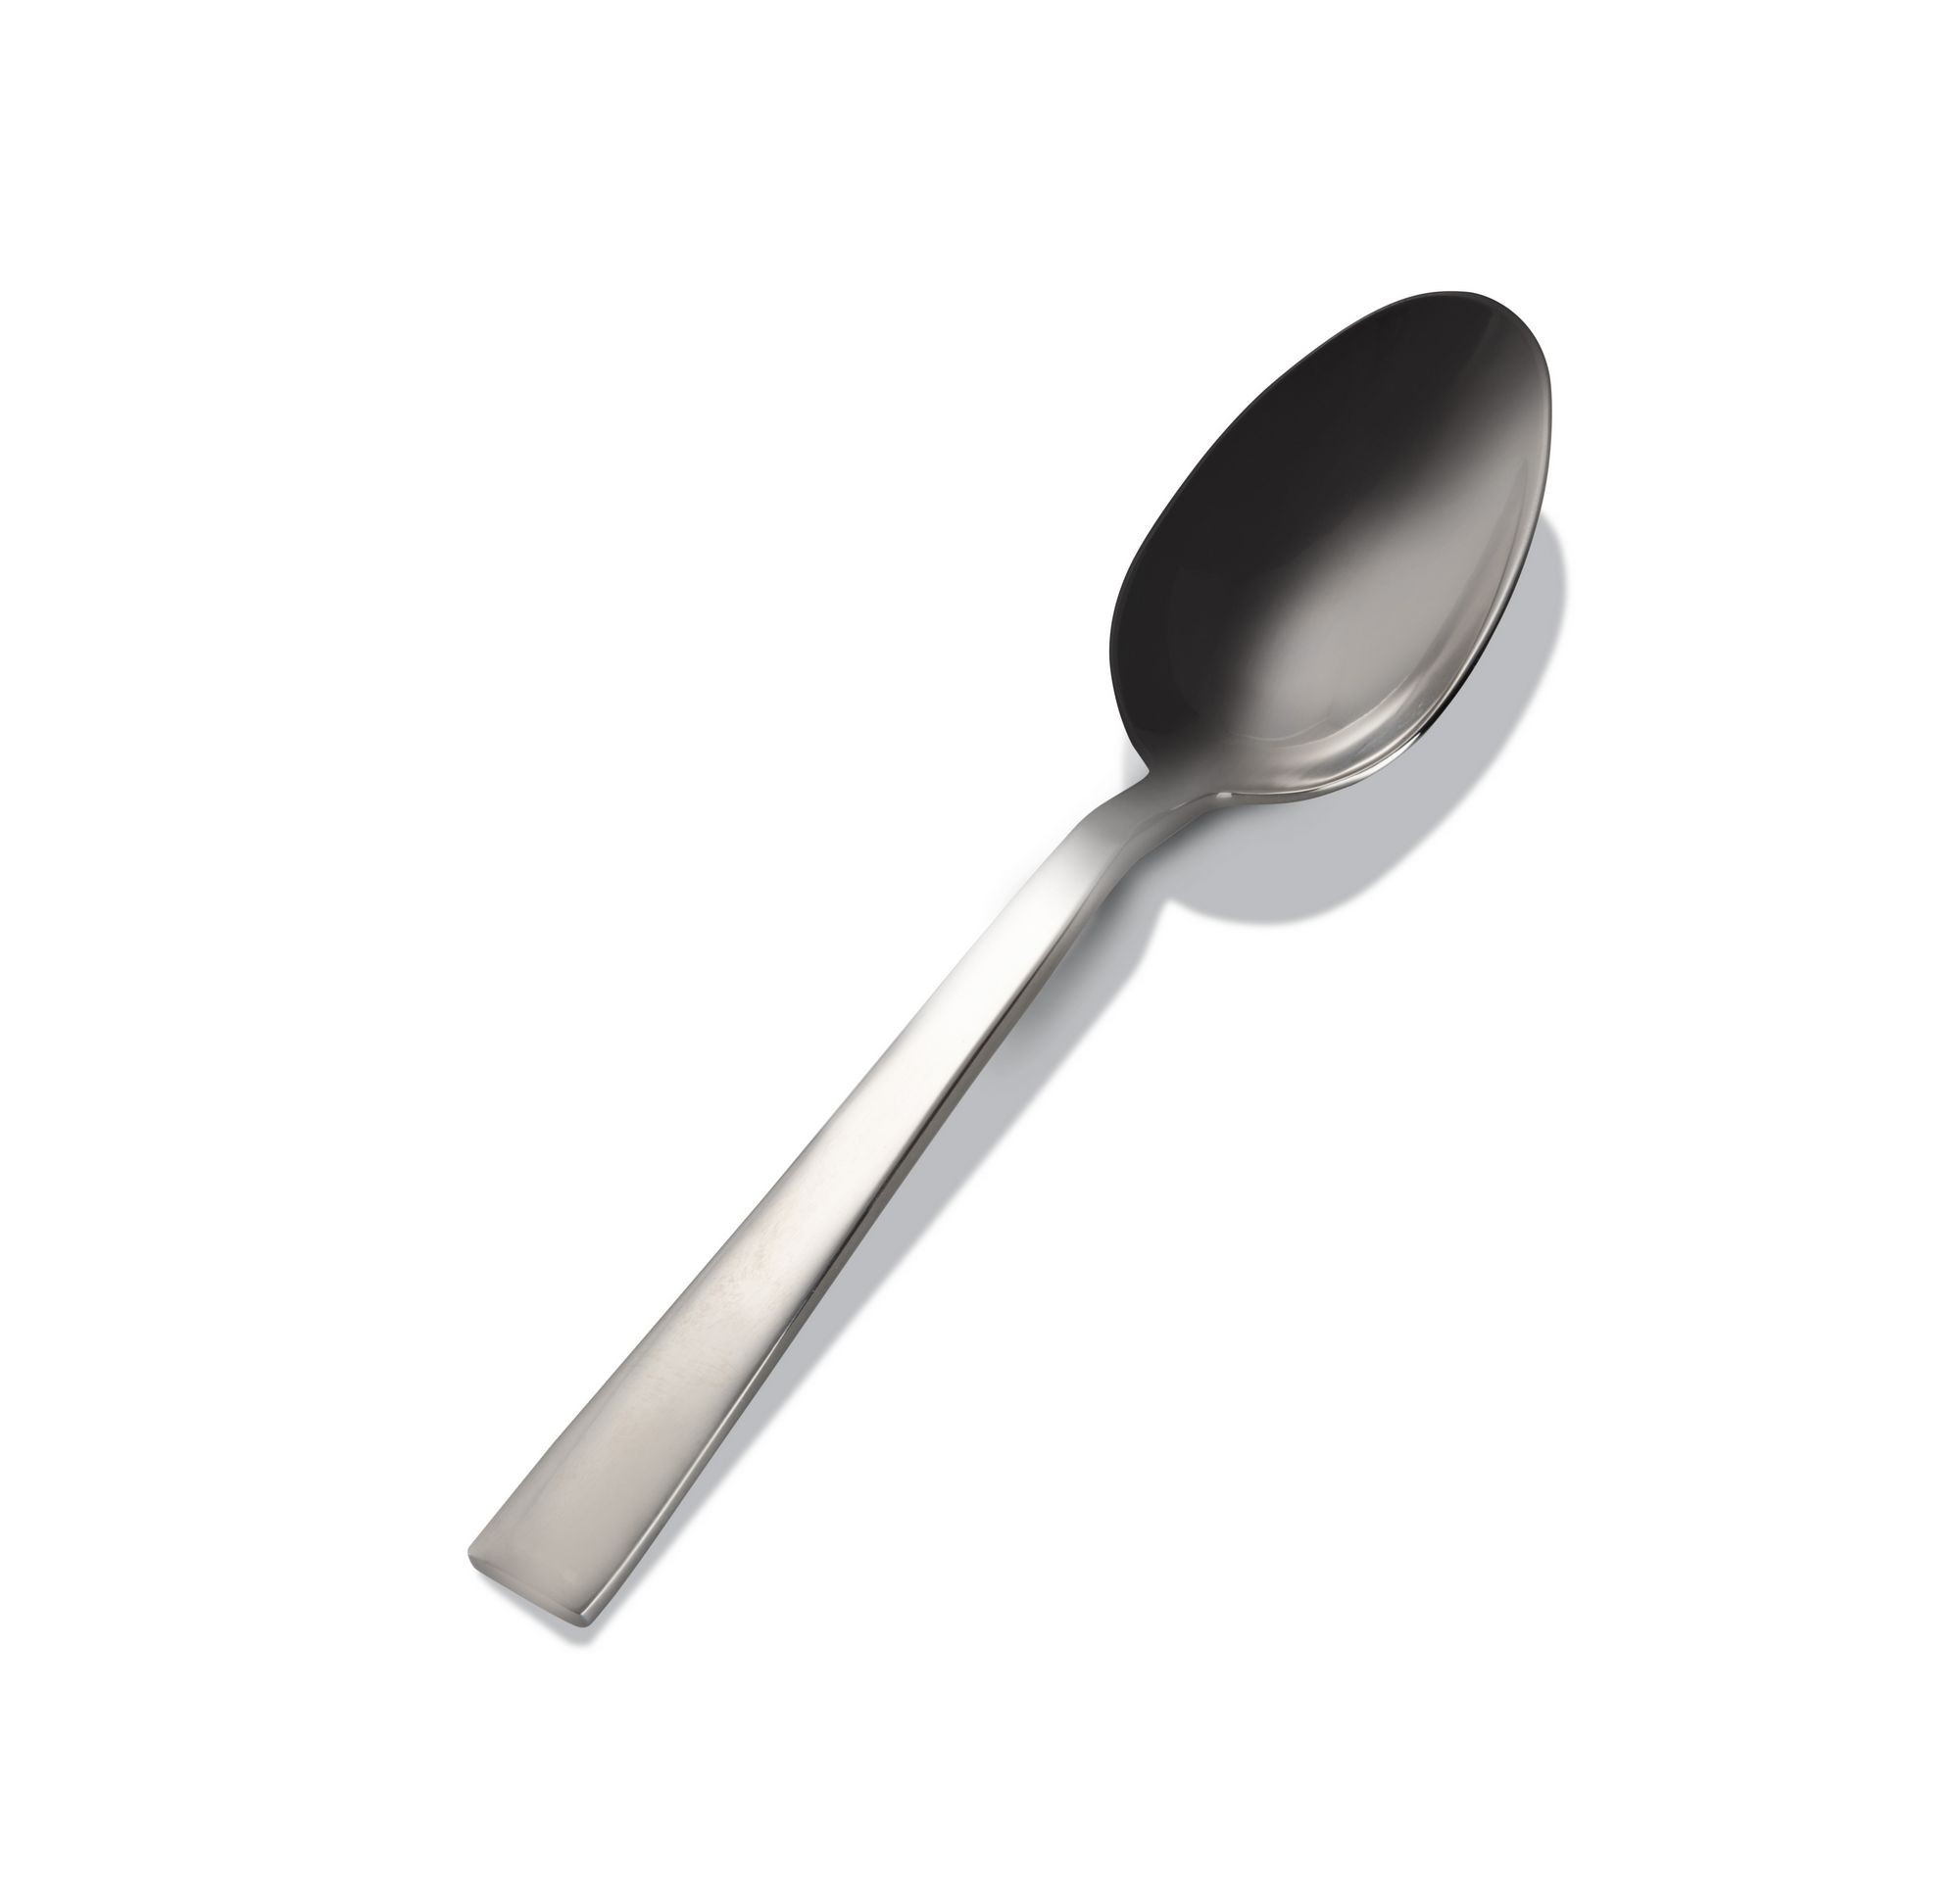 Bon Chef S3704 Roman 18/8 Stainless Steel Serving Spoon